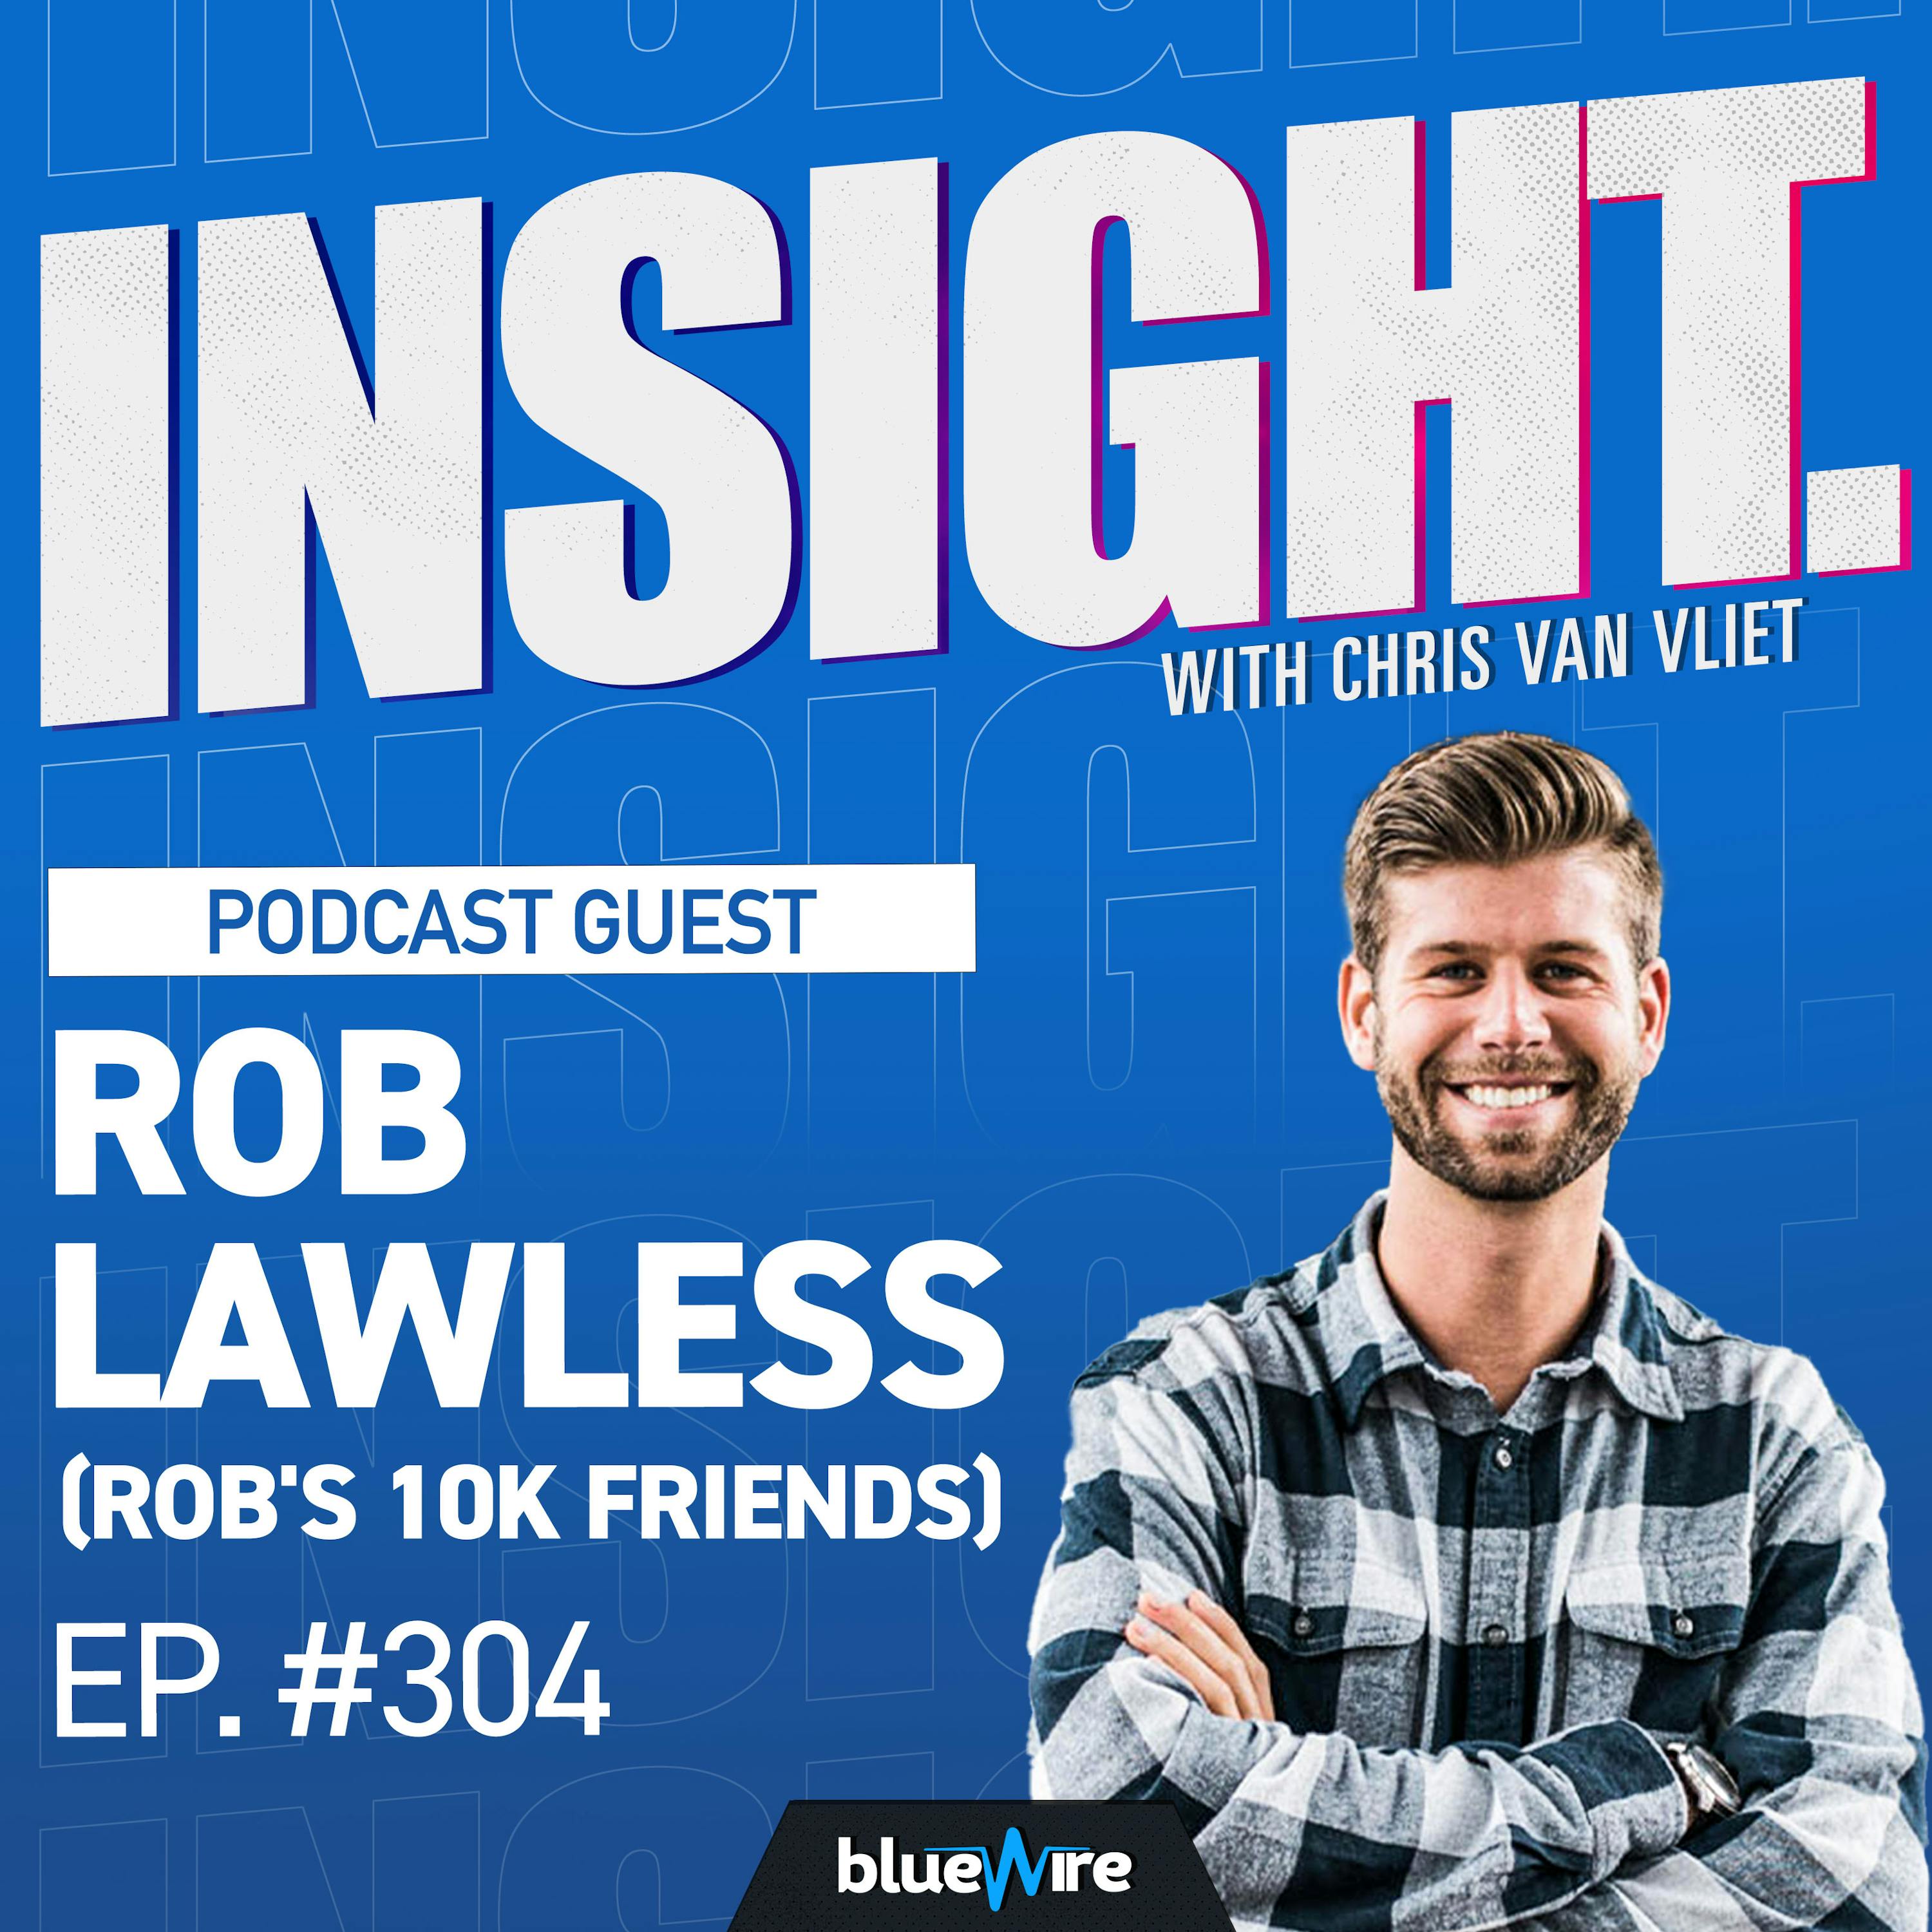 How To Talk To Anyone - Rob Lawless Is On A Quest To Meet 10,000 Strangers